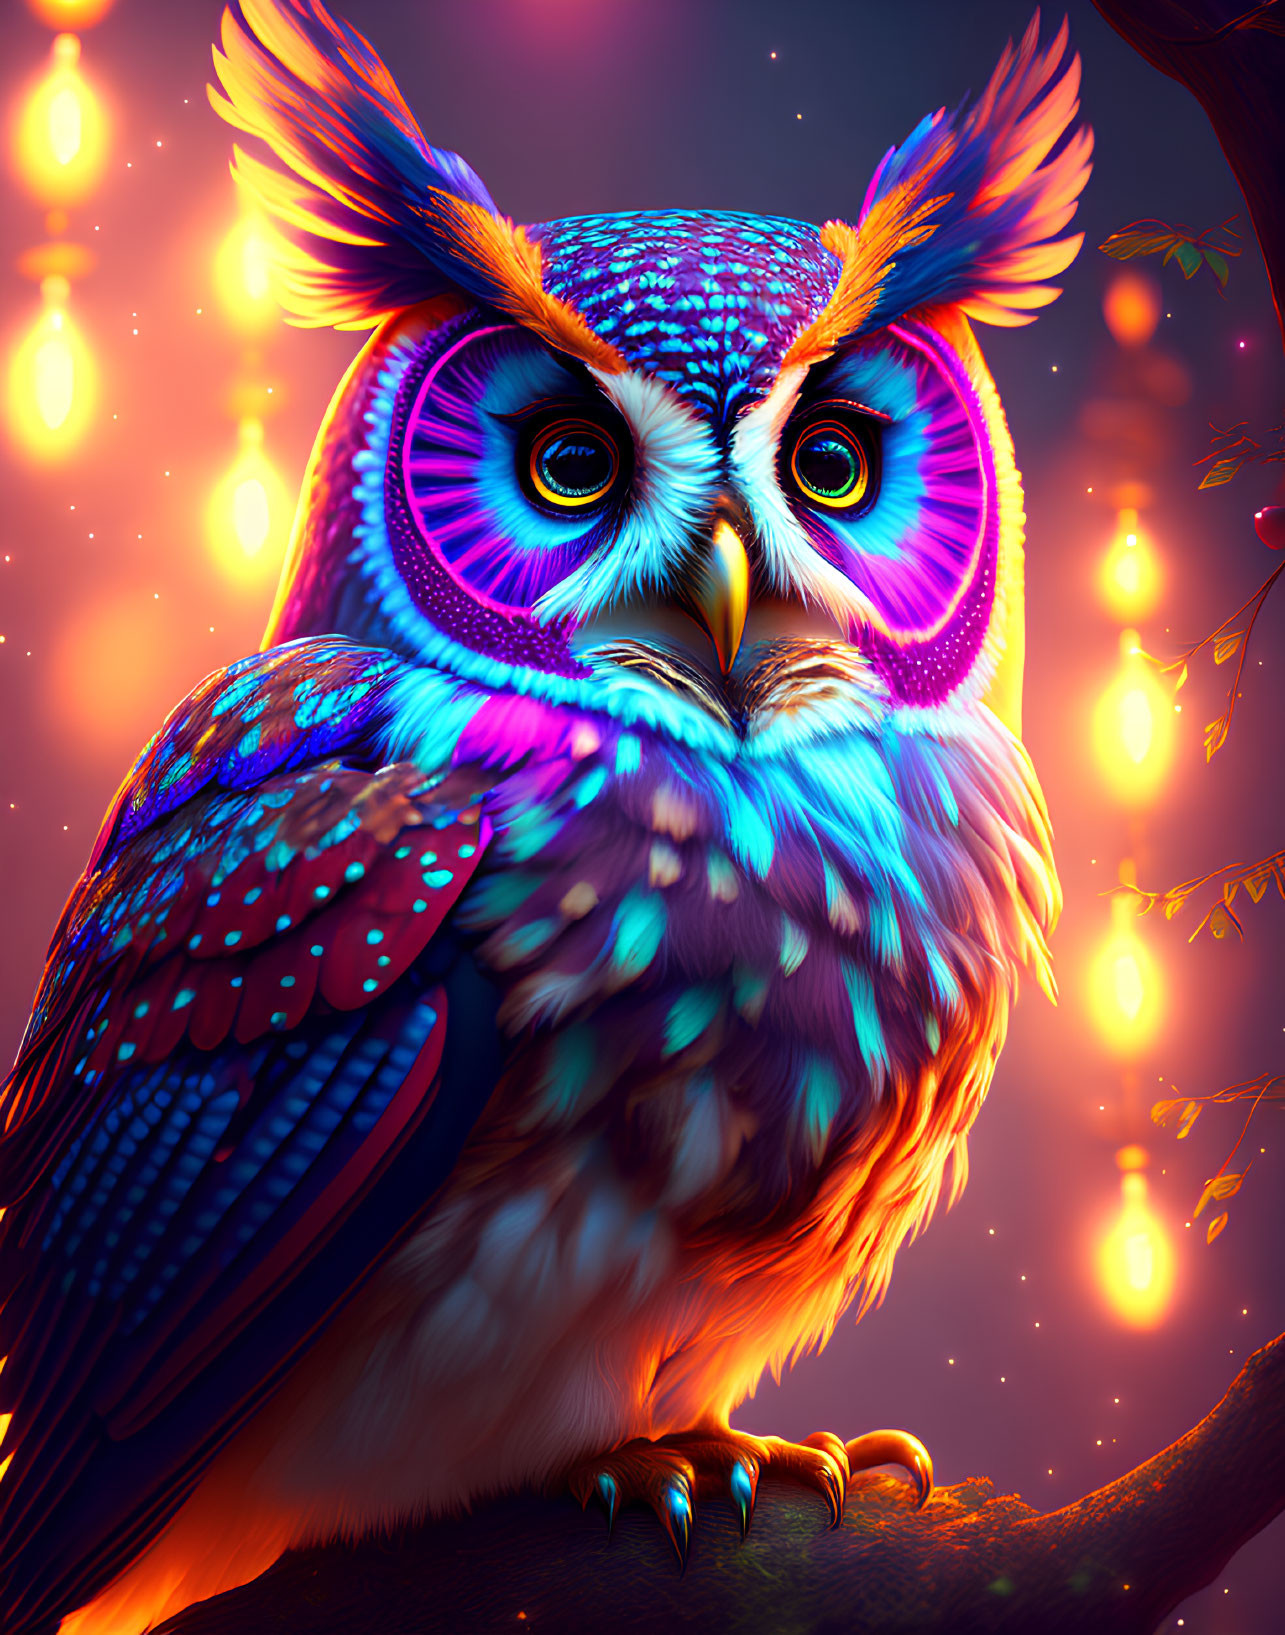 Colorful Owl Artwork: Owl with Purple Eyes on Branch with Lanterns